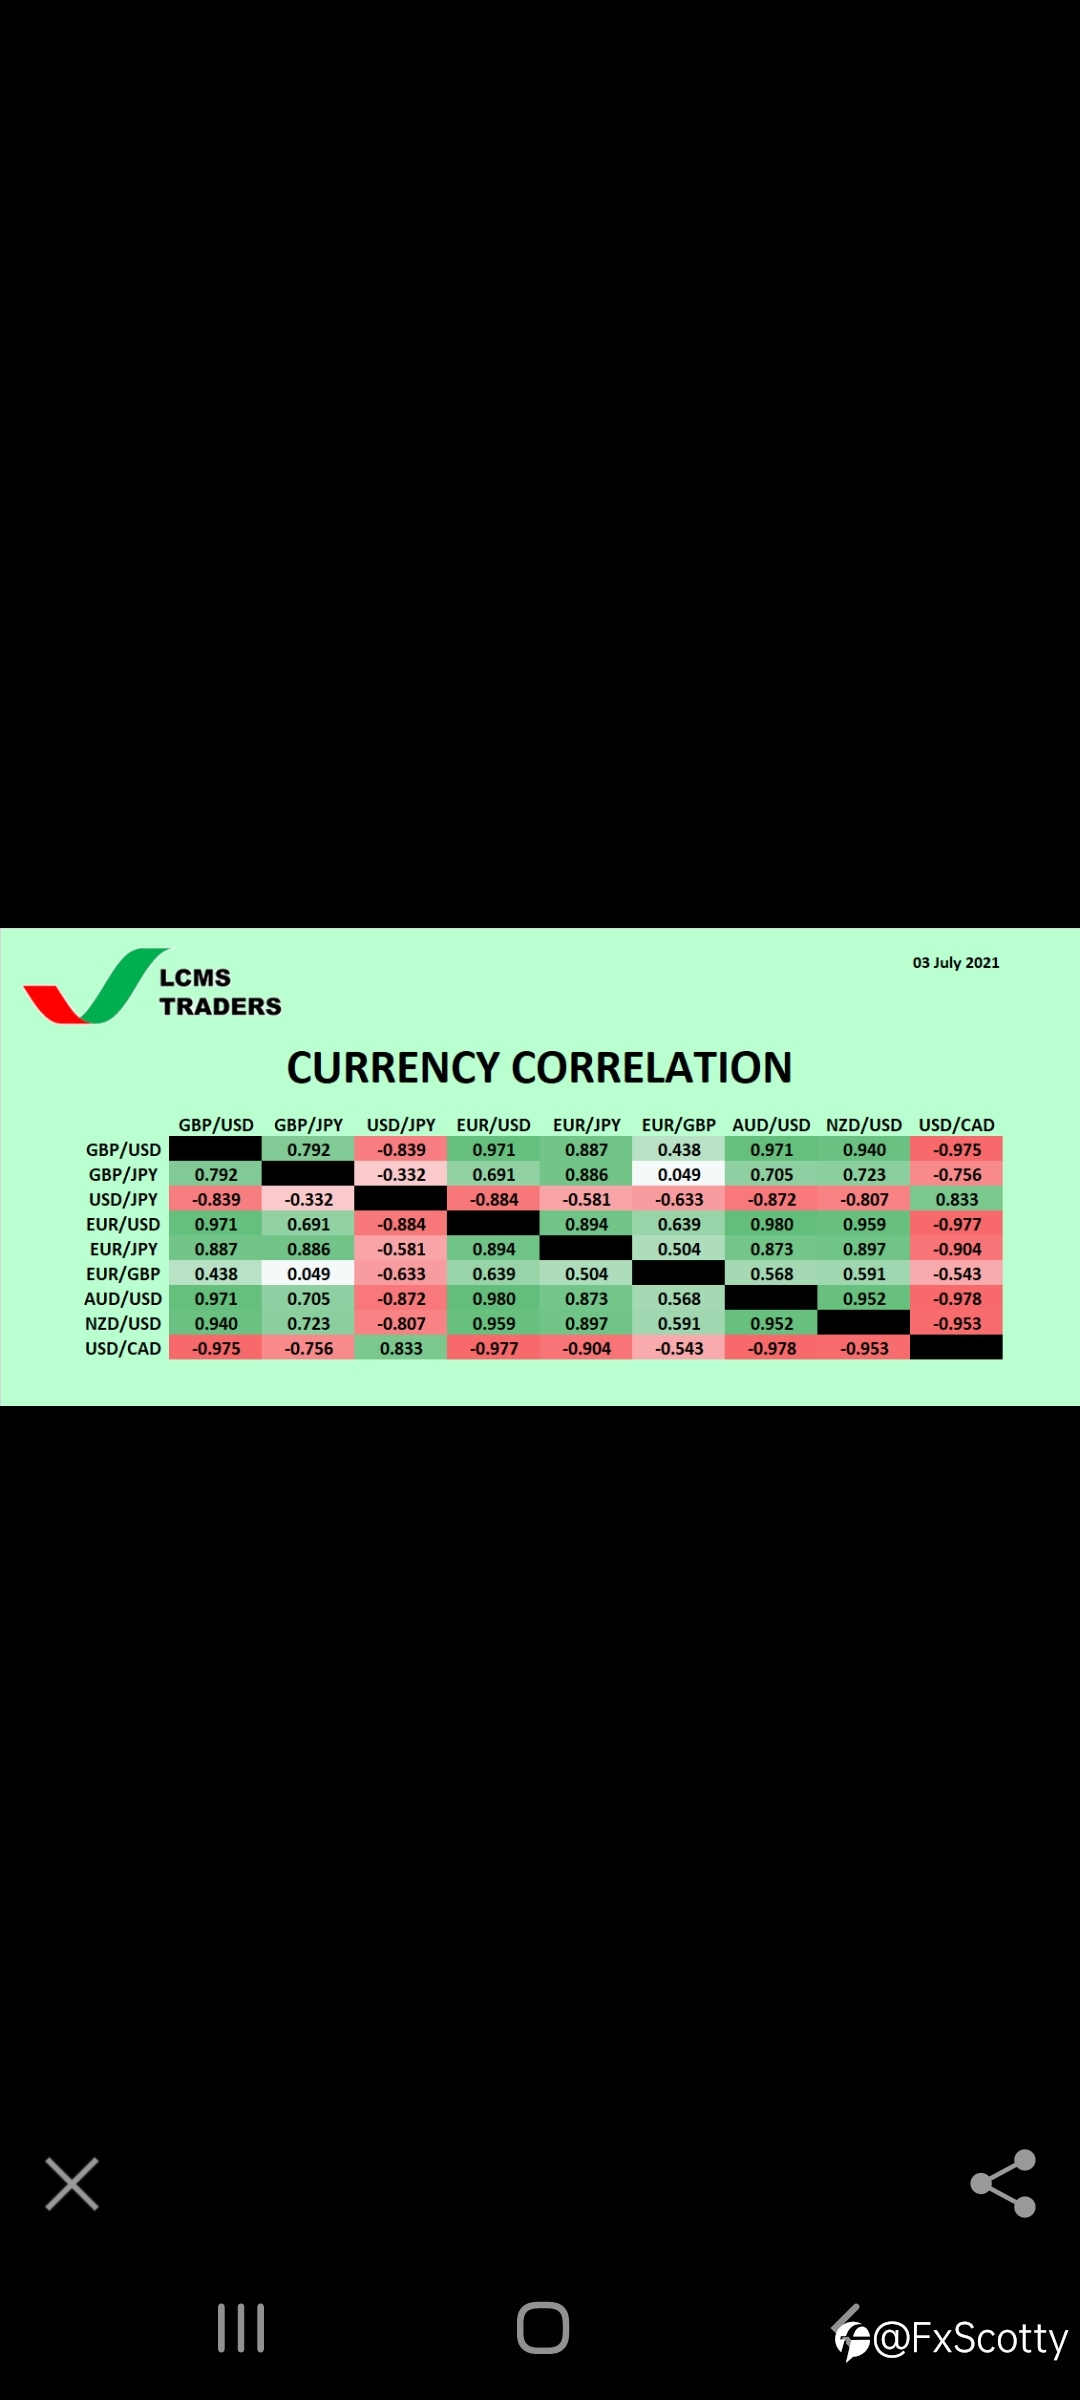 **Currency Correlation (03 July 2021)**